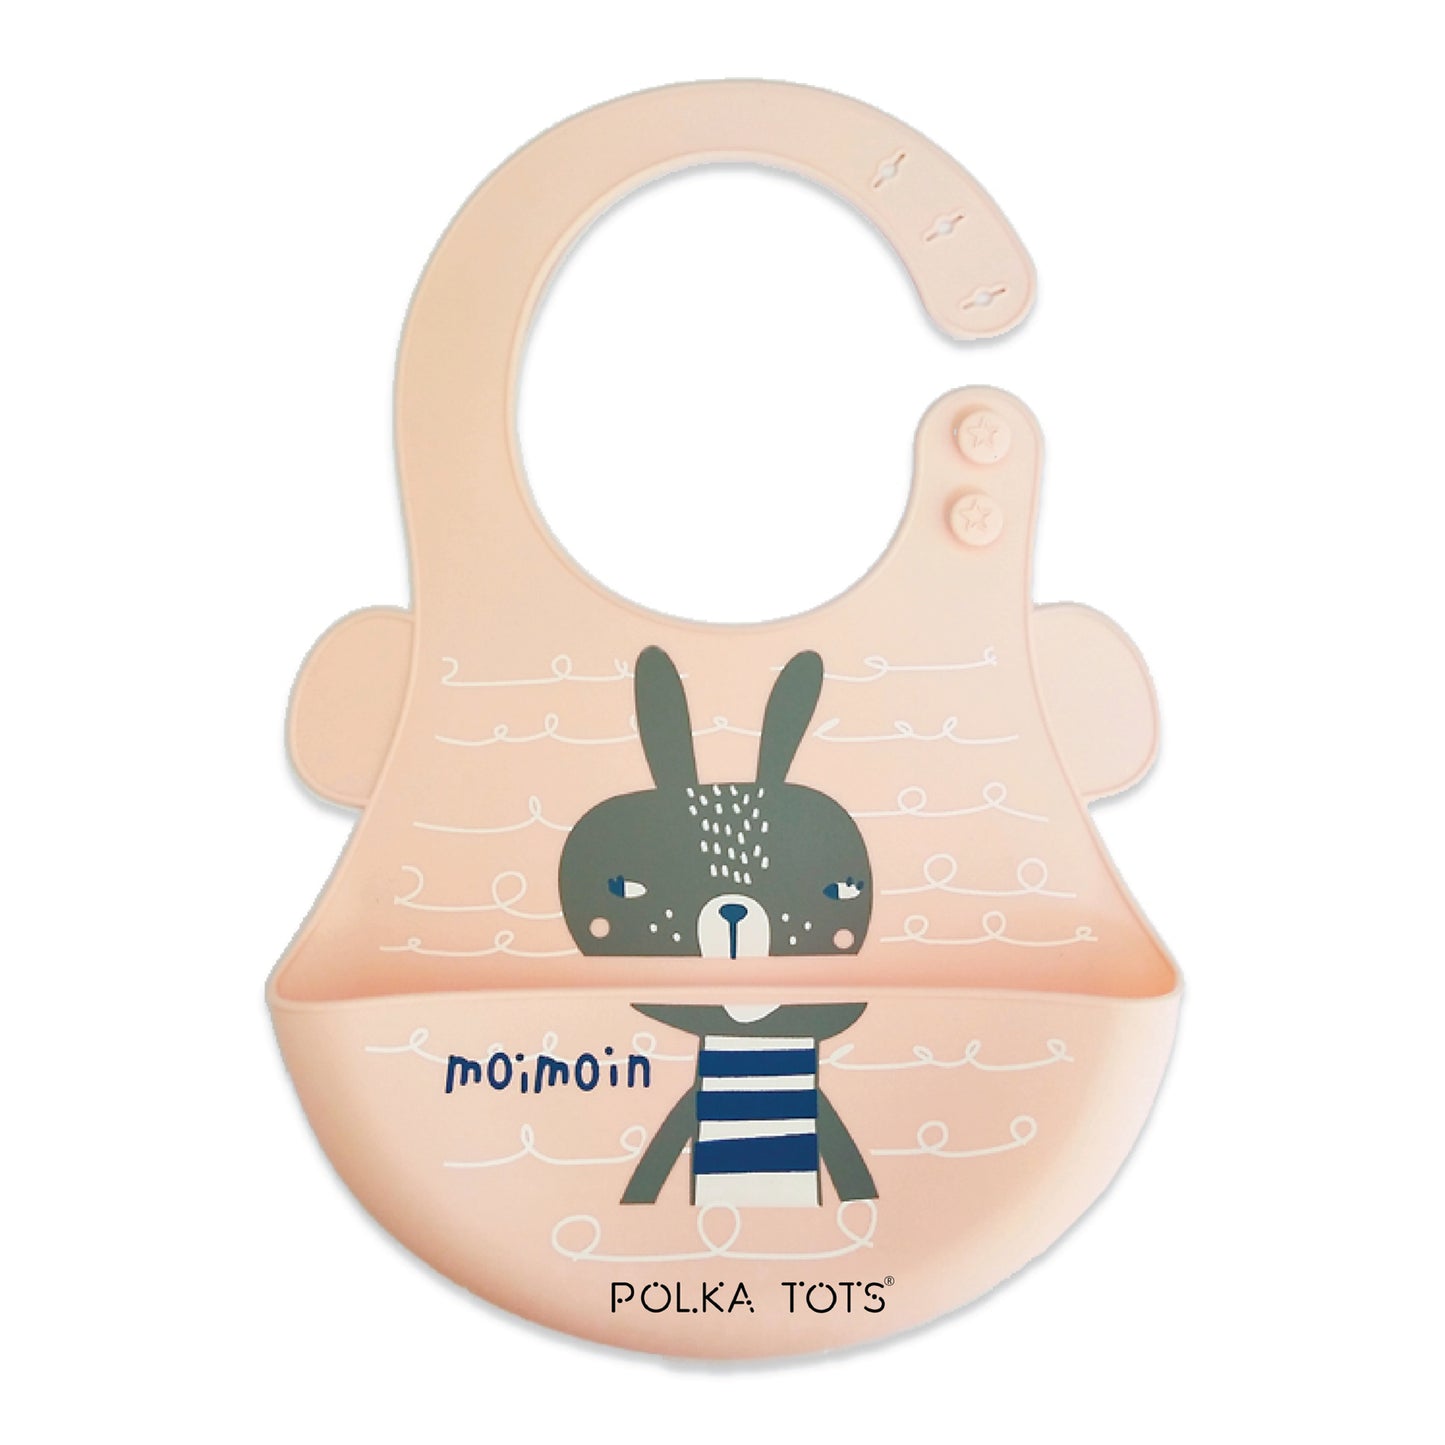 Polka Tots Waterproof Silicone Bibs with Pocket and Adjustable Snaps (Peach Bunny)